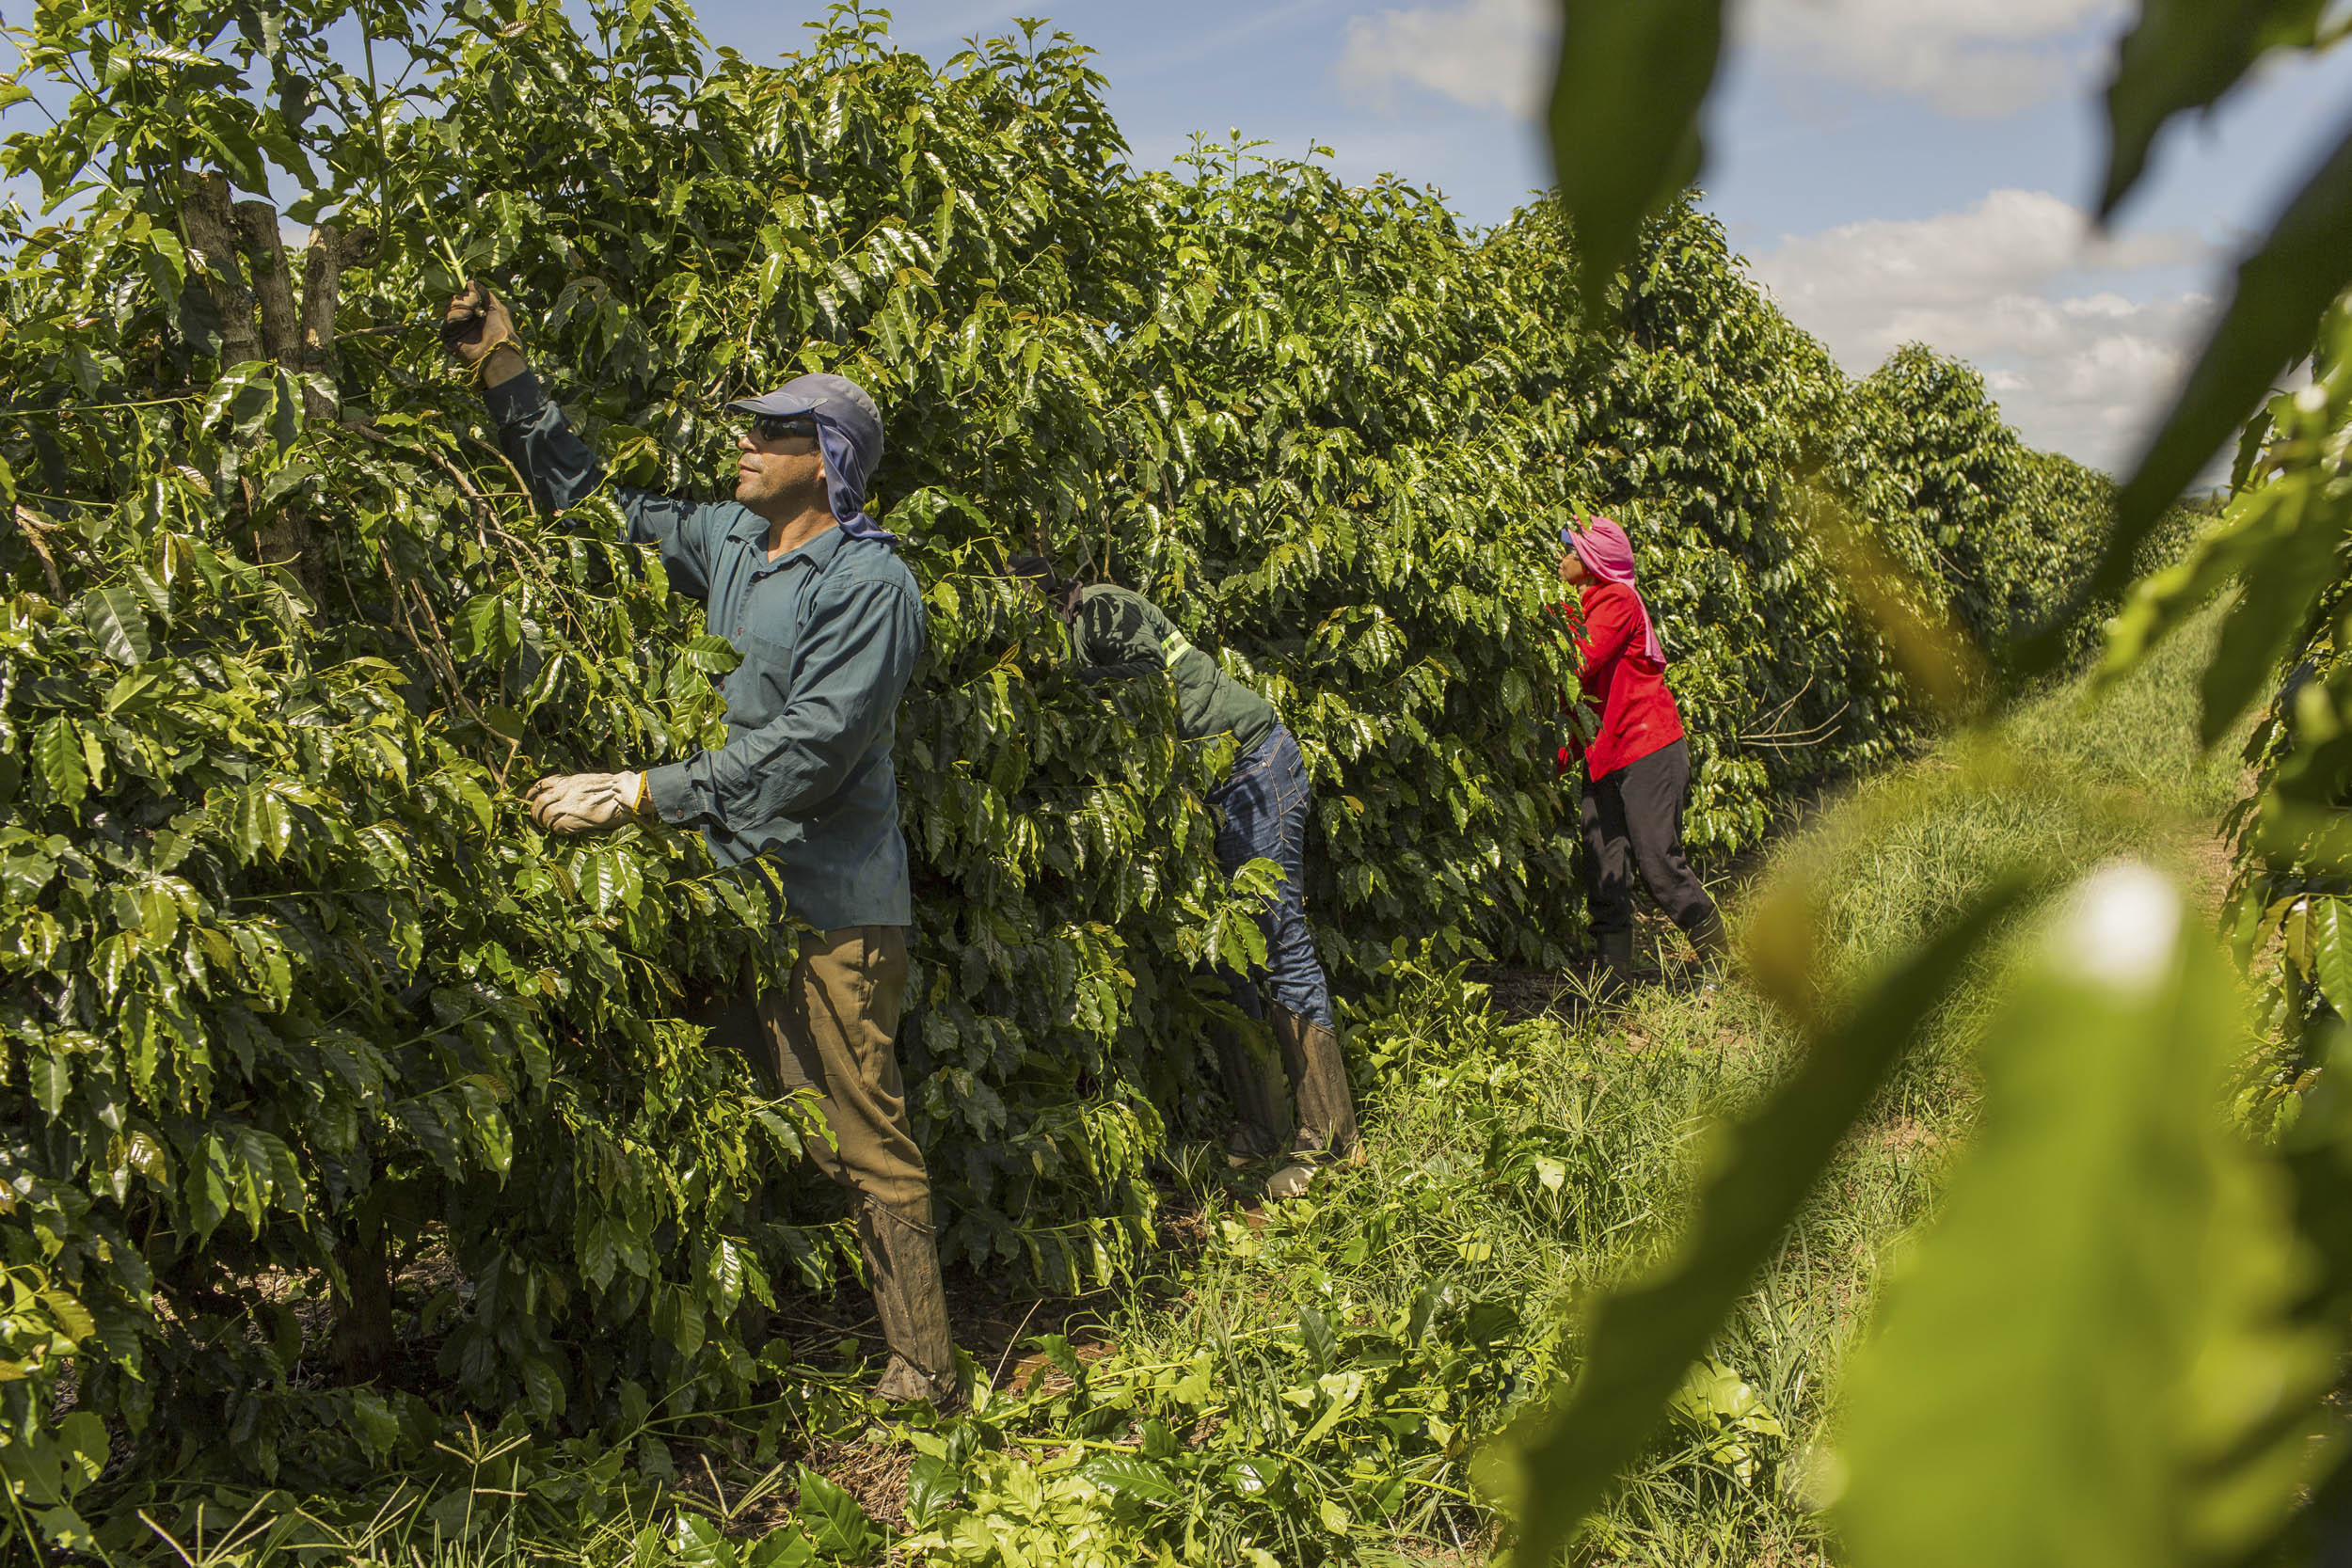 Workers tend to coffee plants at a plantation in Machado, Minas Gerais State, Brazil.